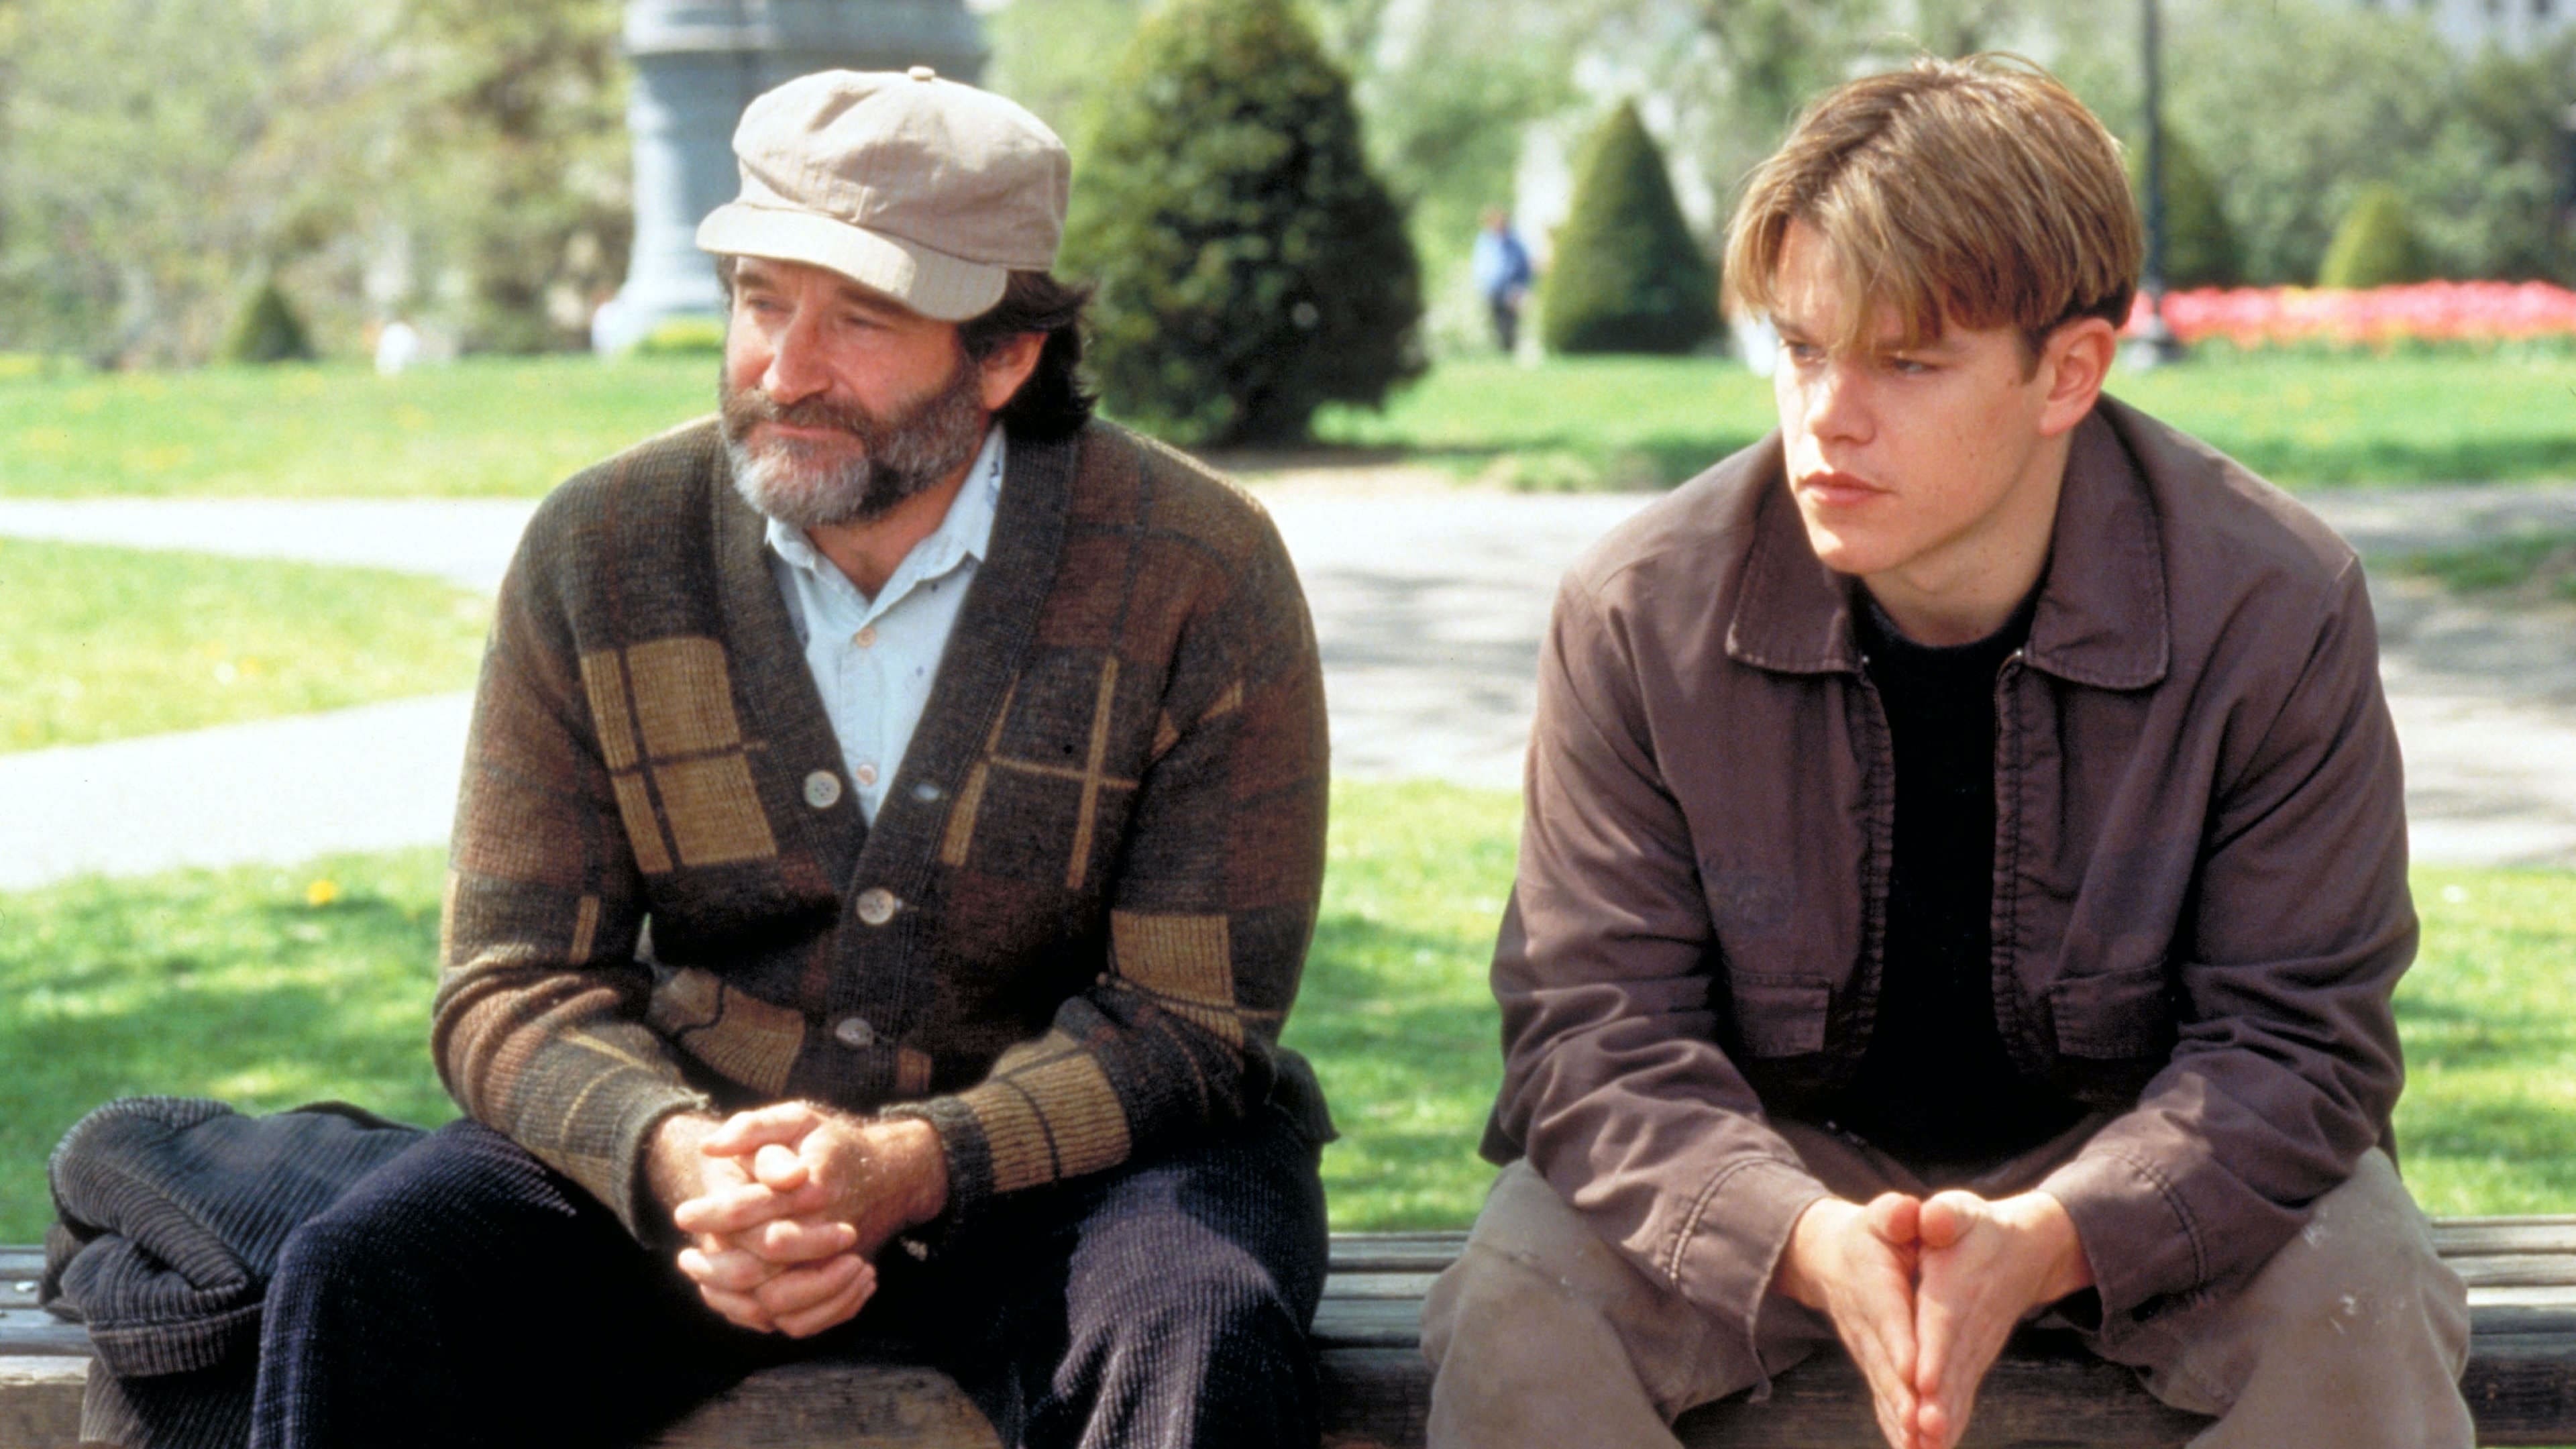 Good Will Hunting streaming now on HBO Max.